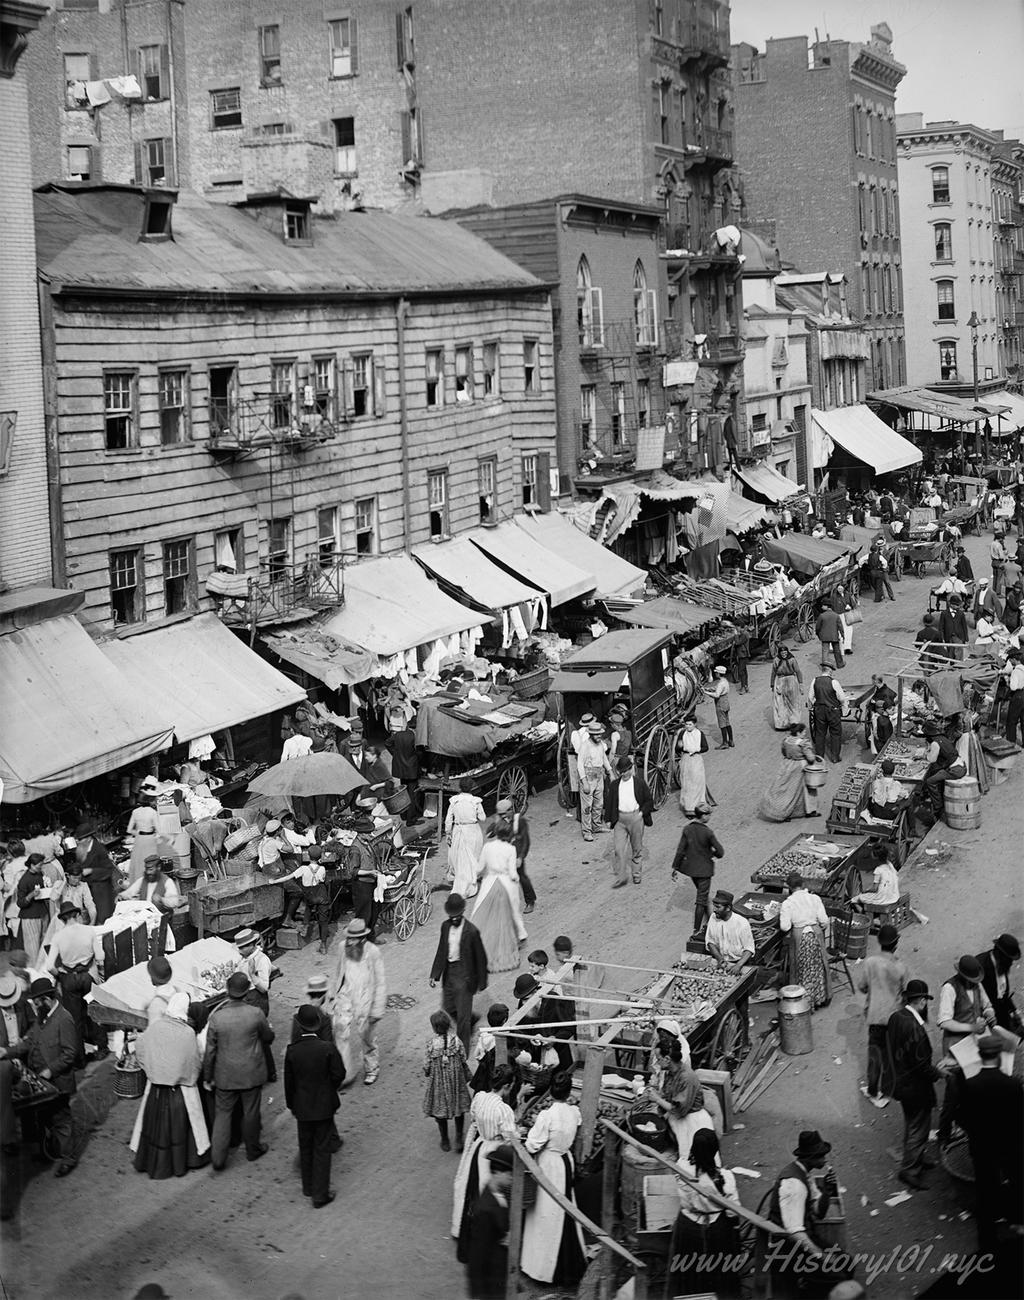 Photograph of a busy East side street lined with Jewish markets and filled with pedestrians.